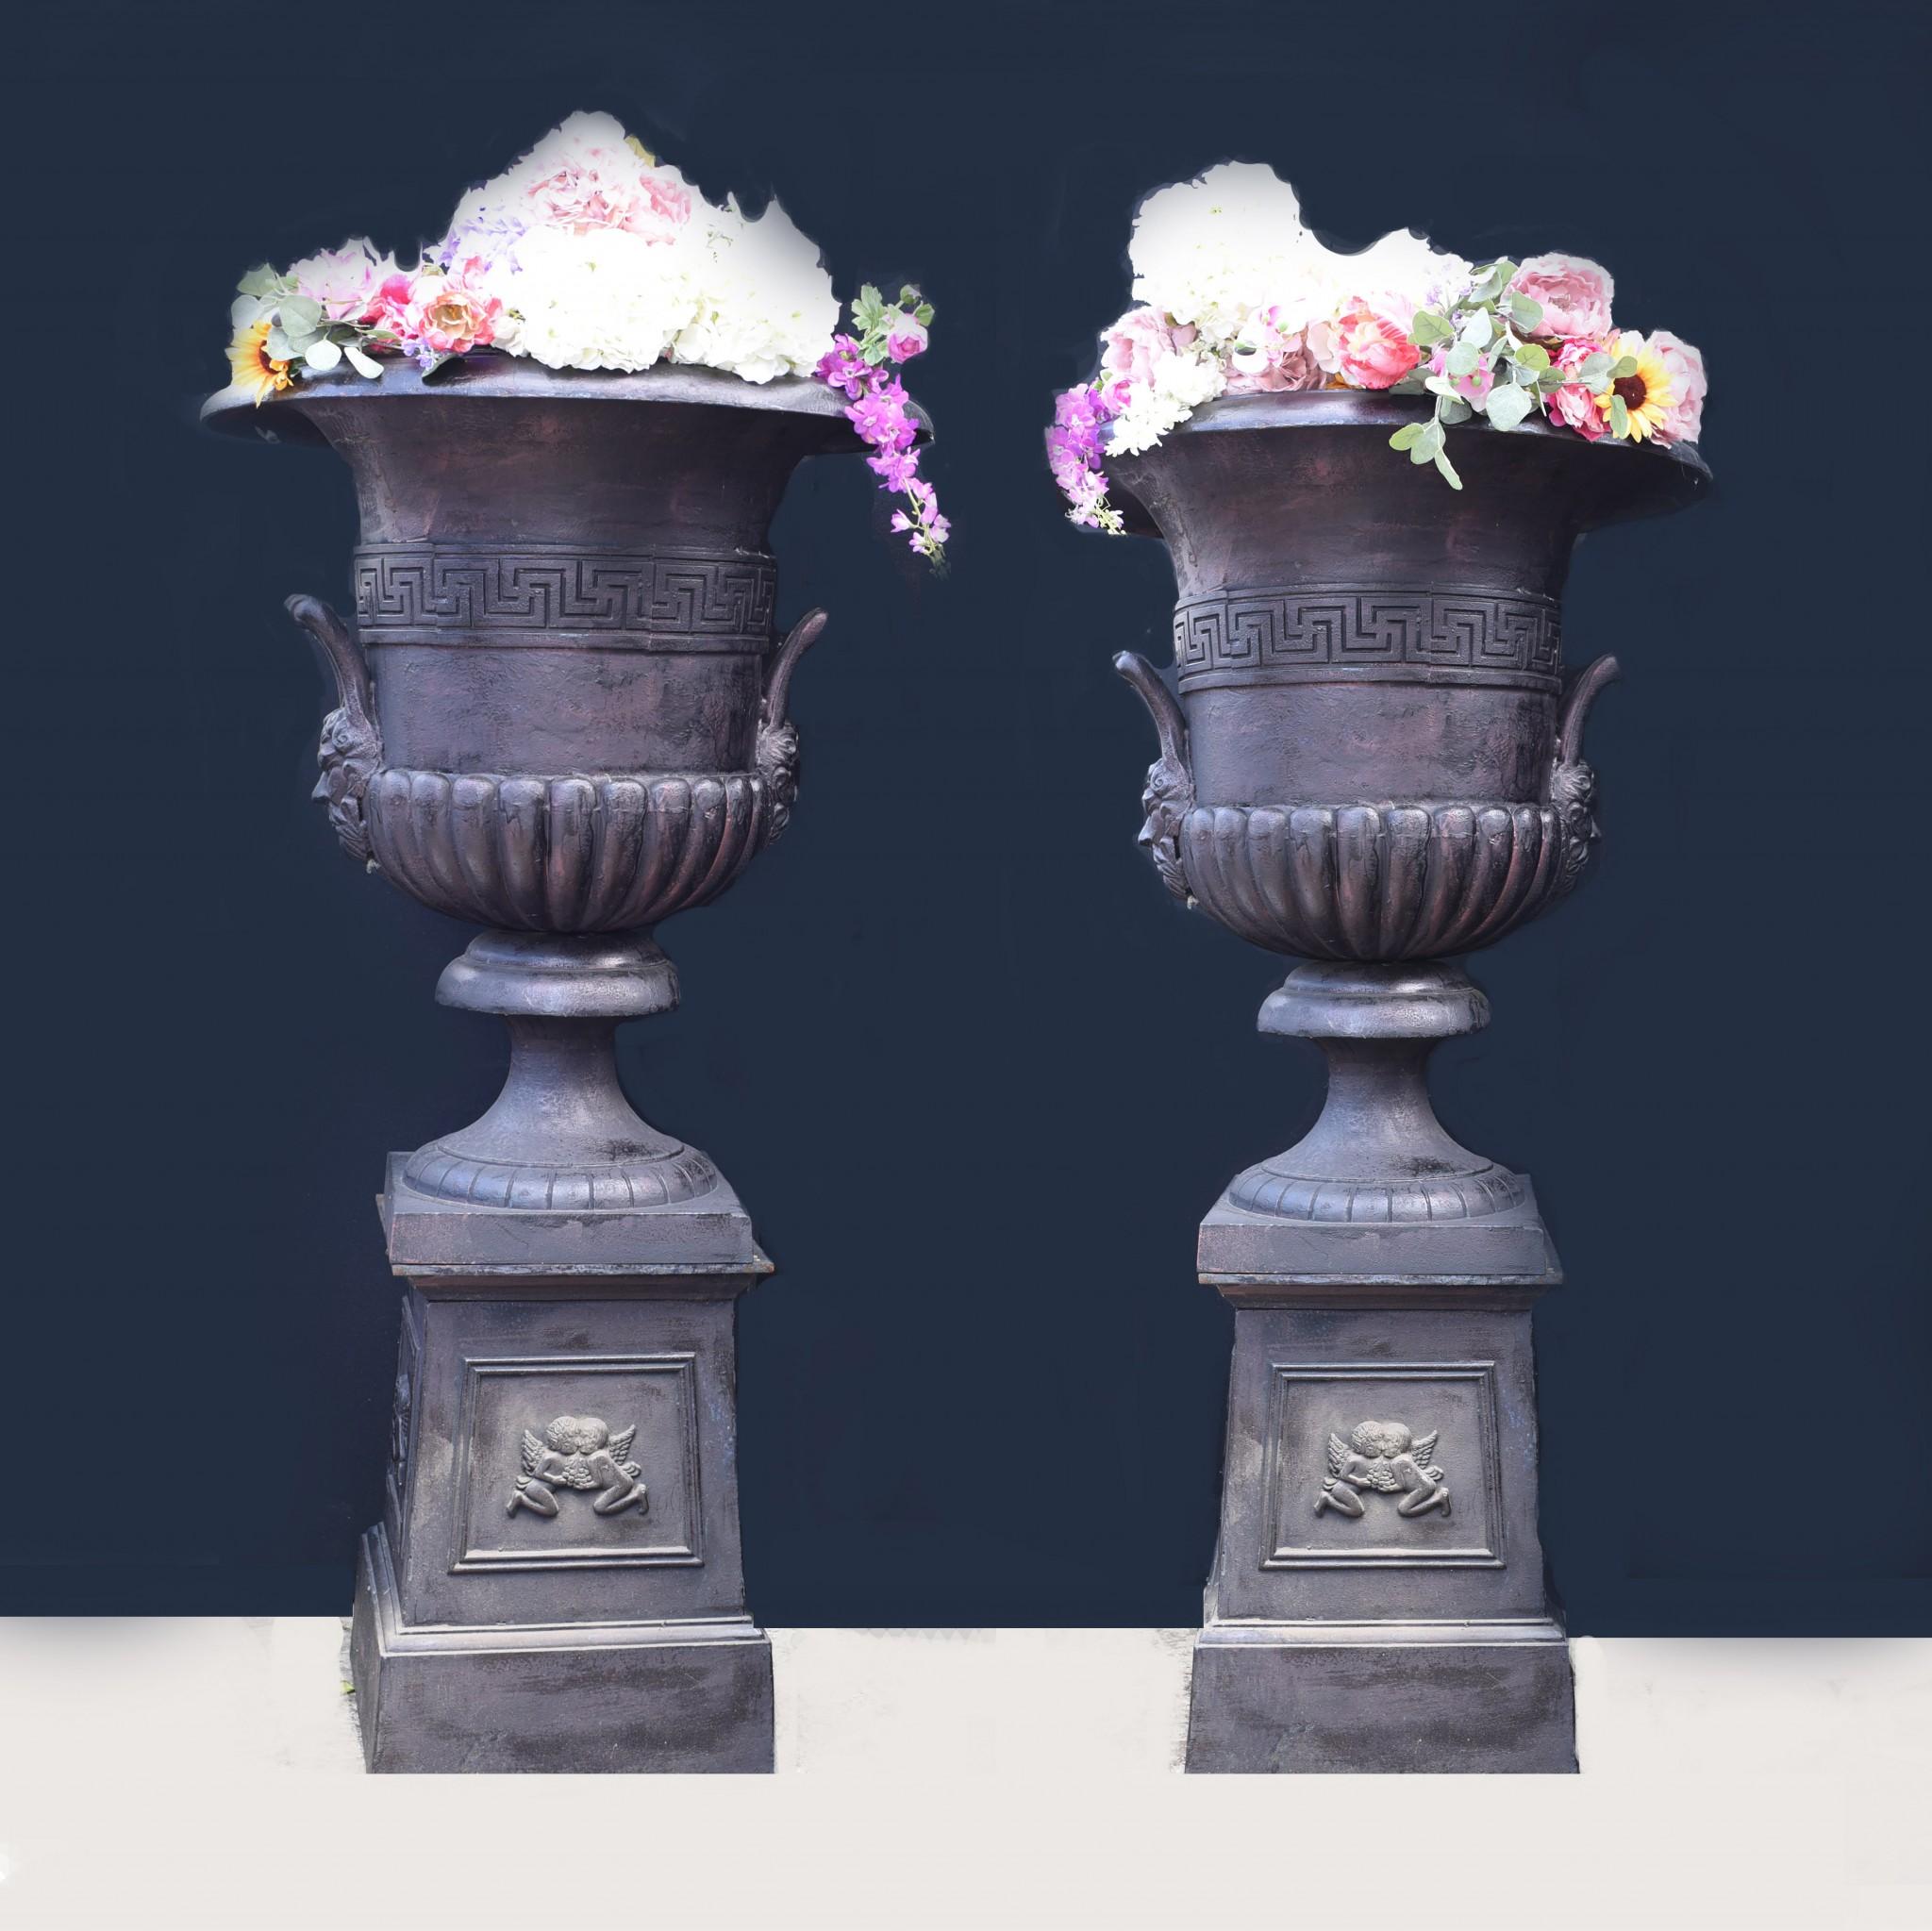 - Eye catching pair of large cast iron garden urns
- Classically inspired with campana form and standing on the pedestal base
- stand in at almost seven feet tall - 205 cm
- Perfect for the garden, look great overflowing with foliage and vines
-